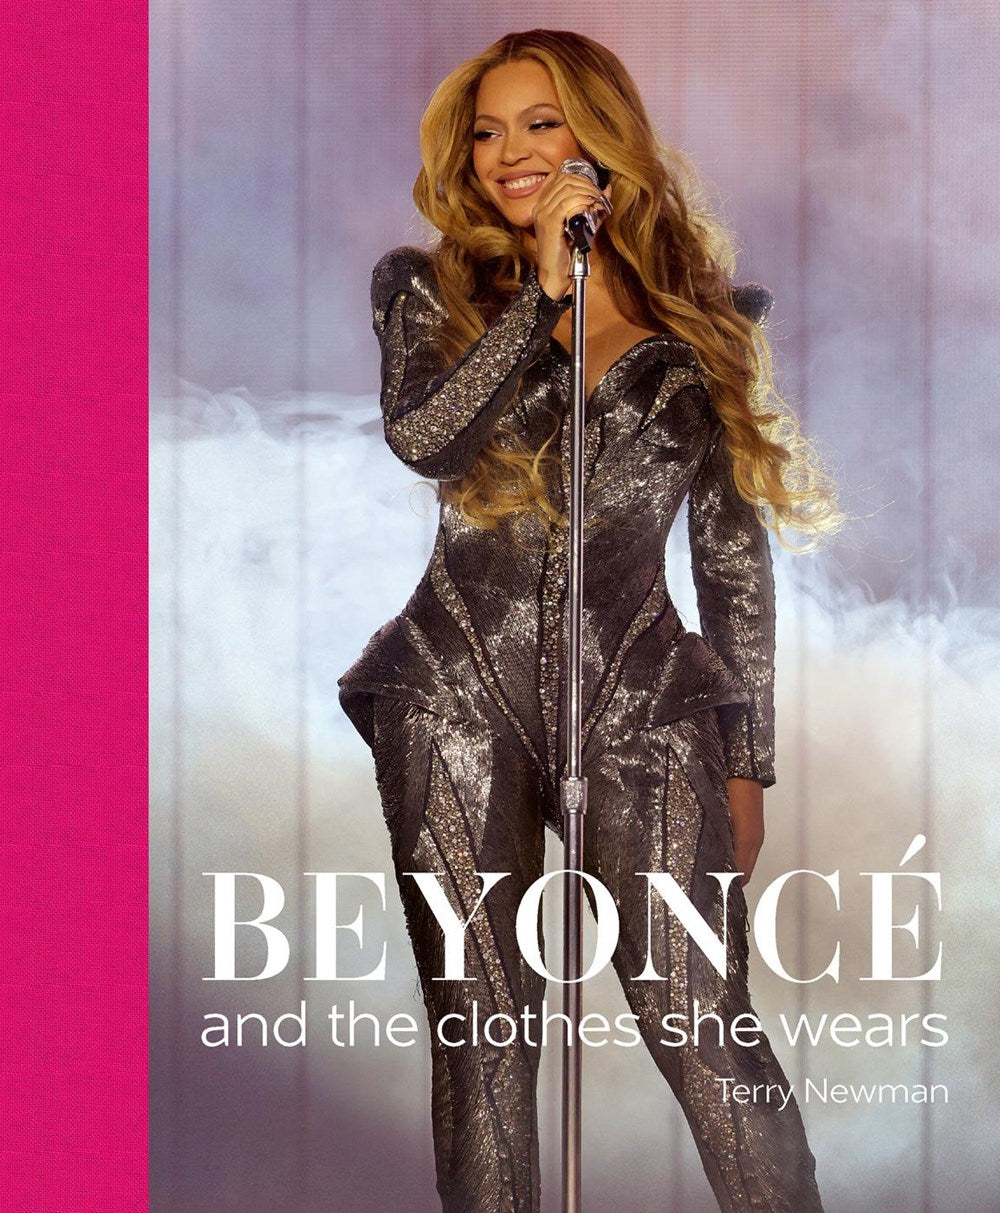 Beyonce - And the clothes she wears